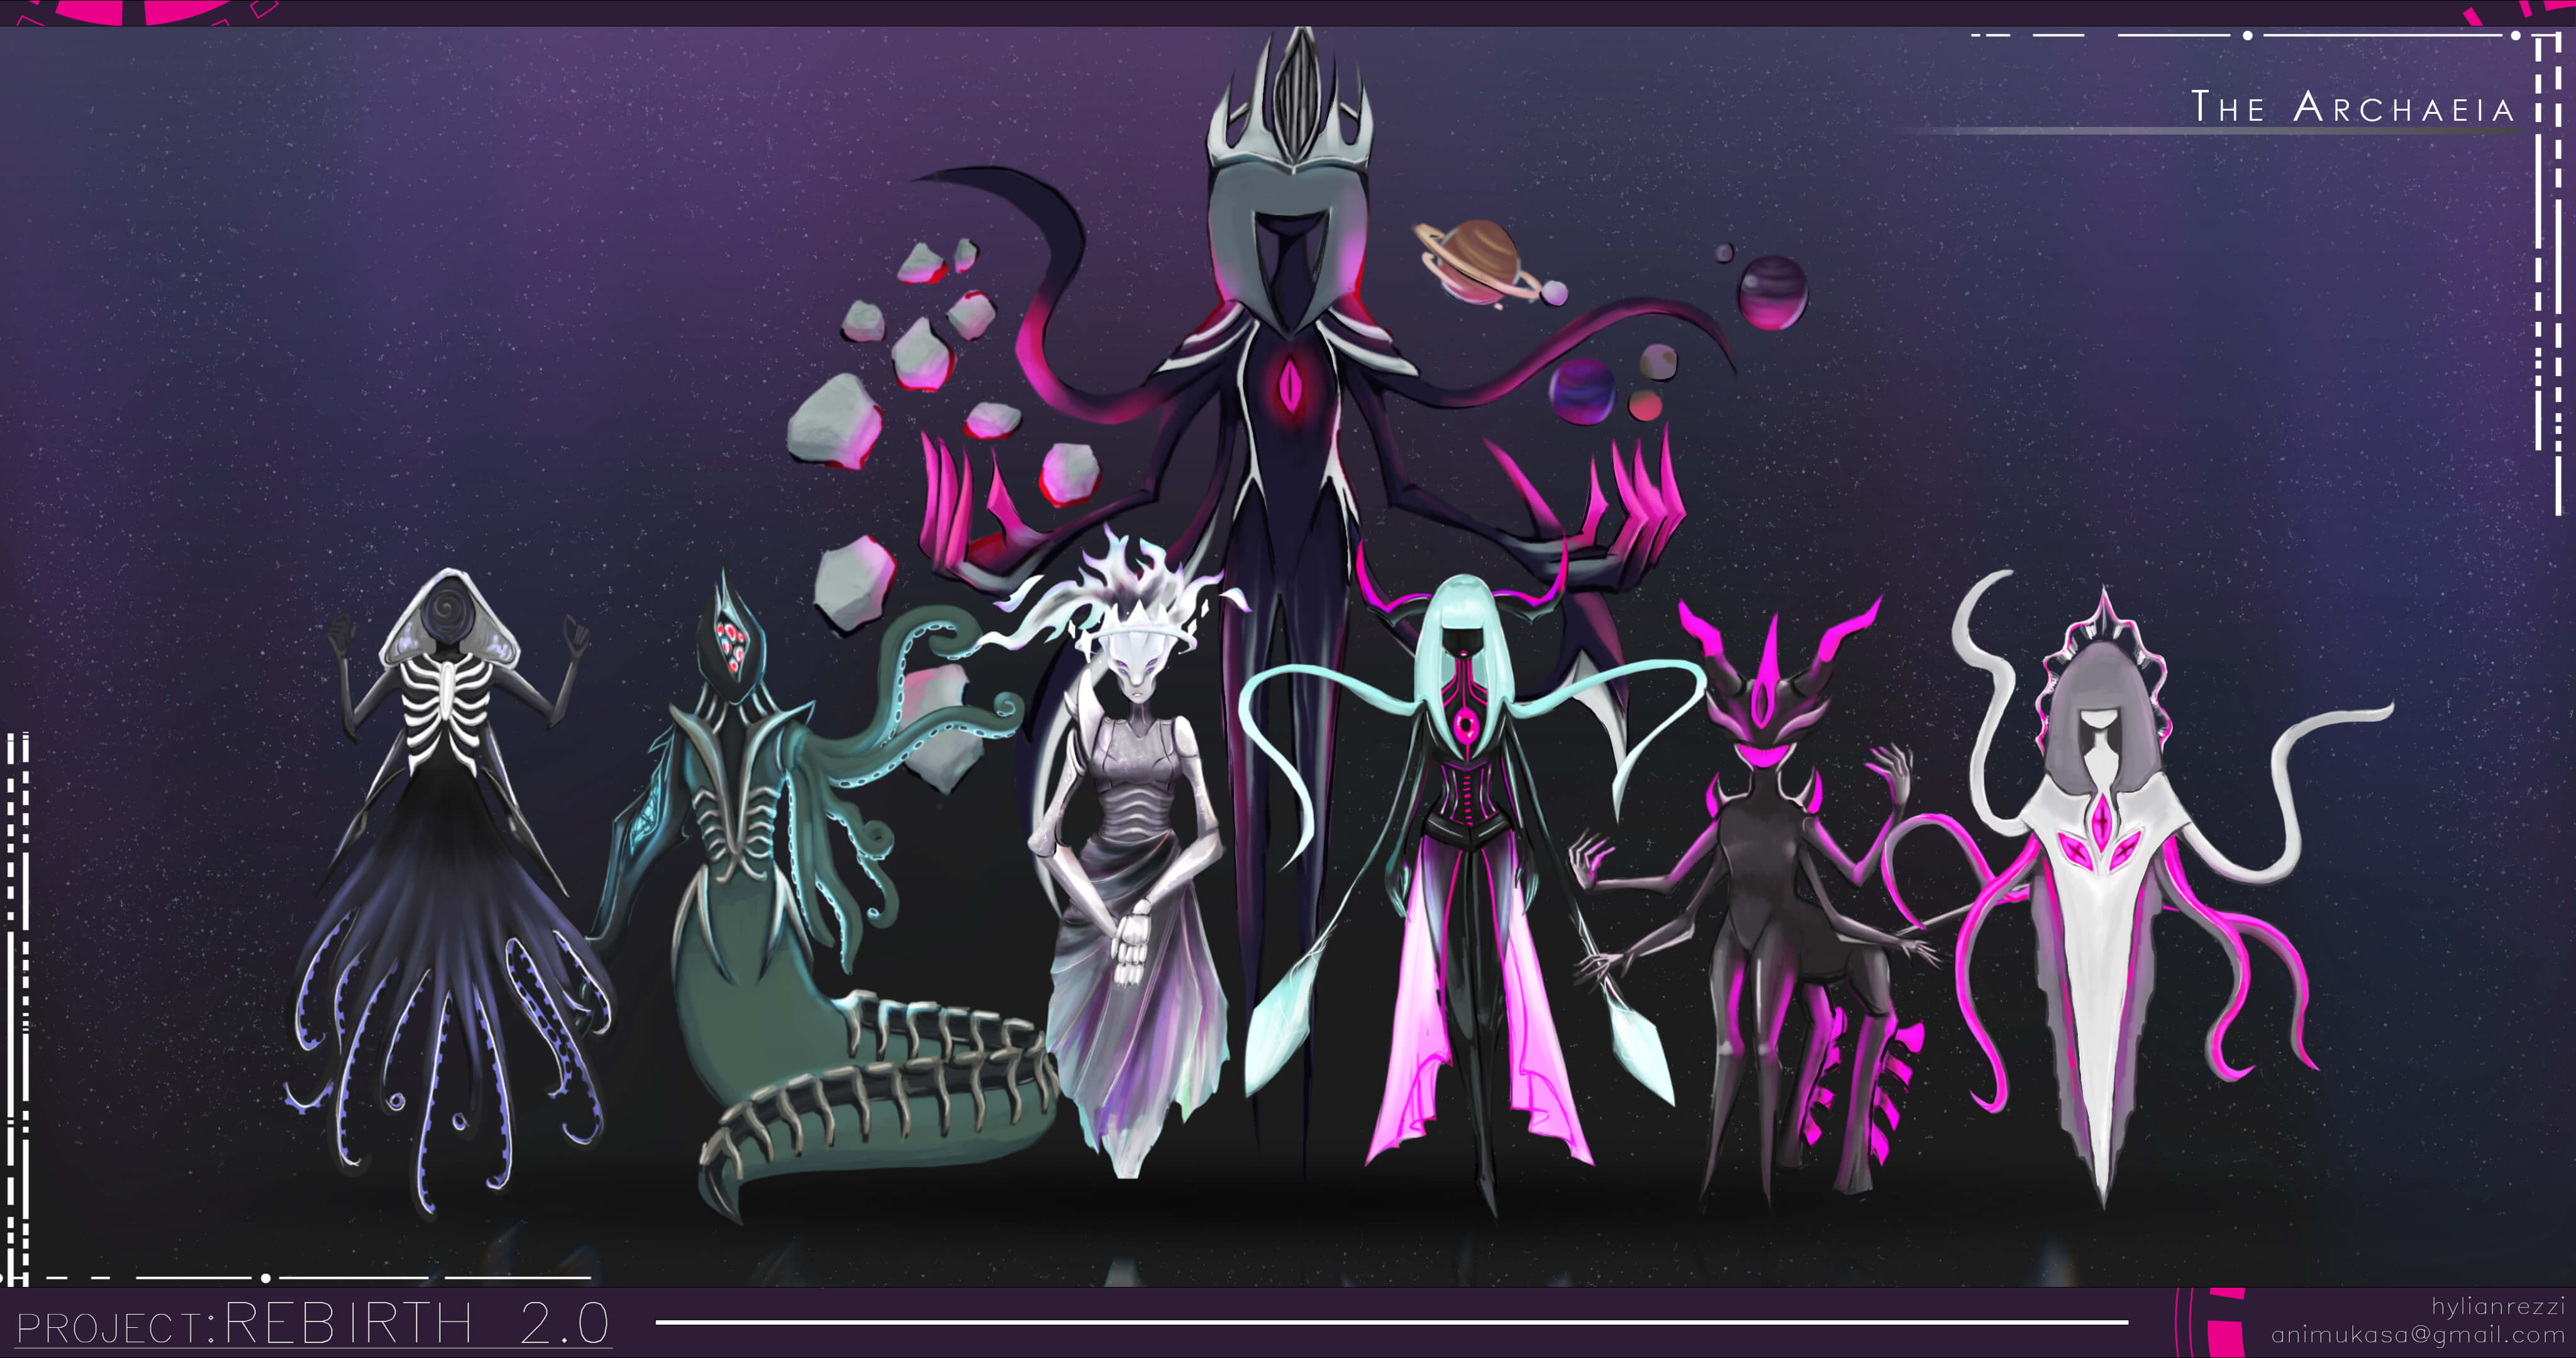 Digital painting displaying 7 creatures in an overall dark but cosmic setting with highlights of neon colours.